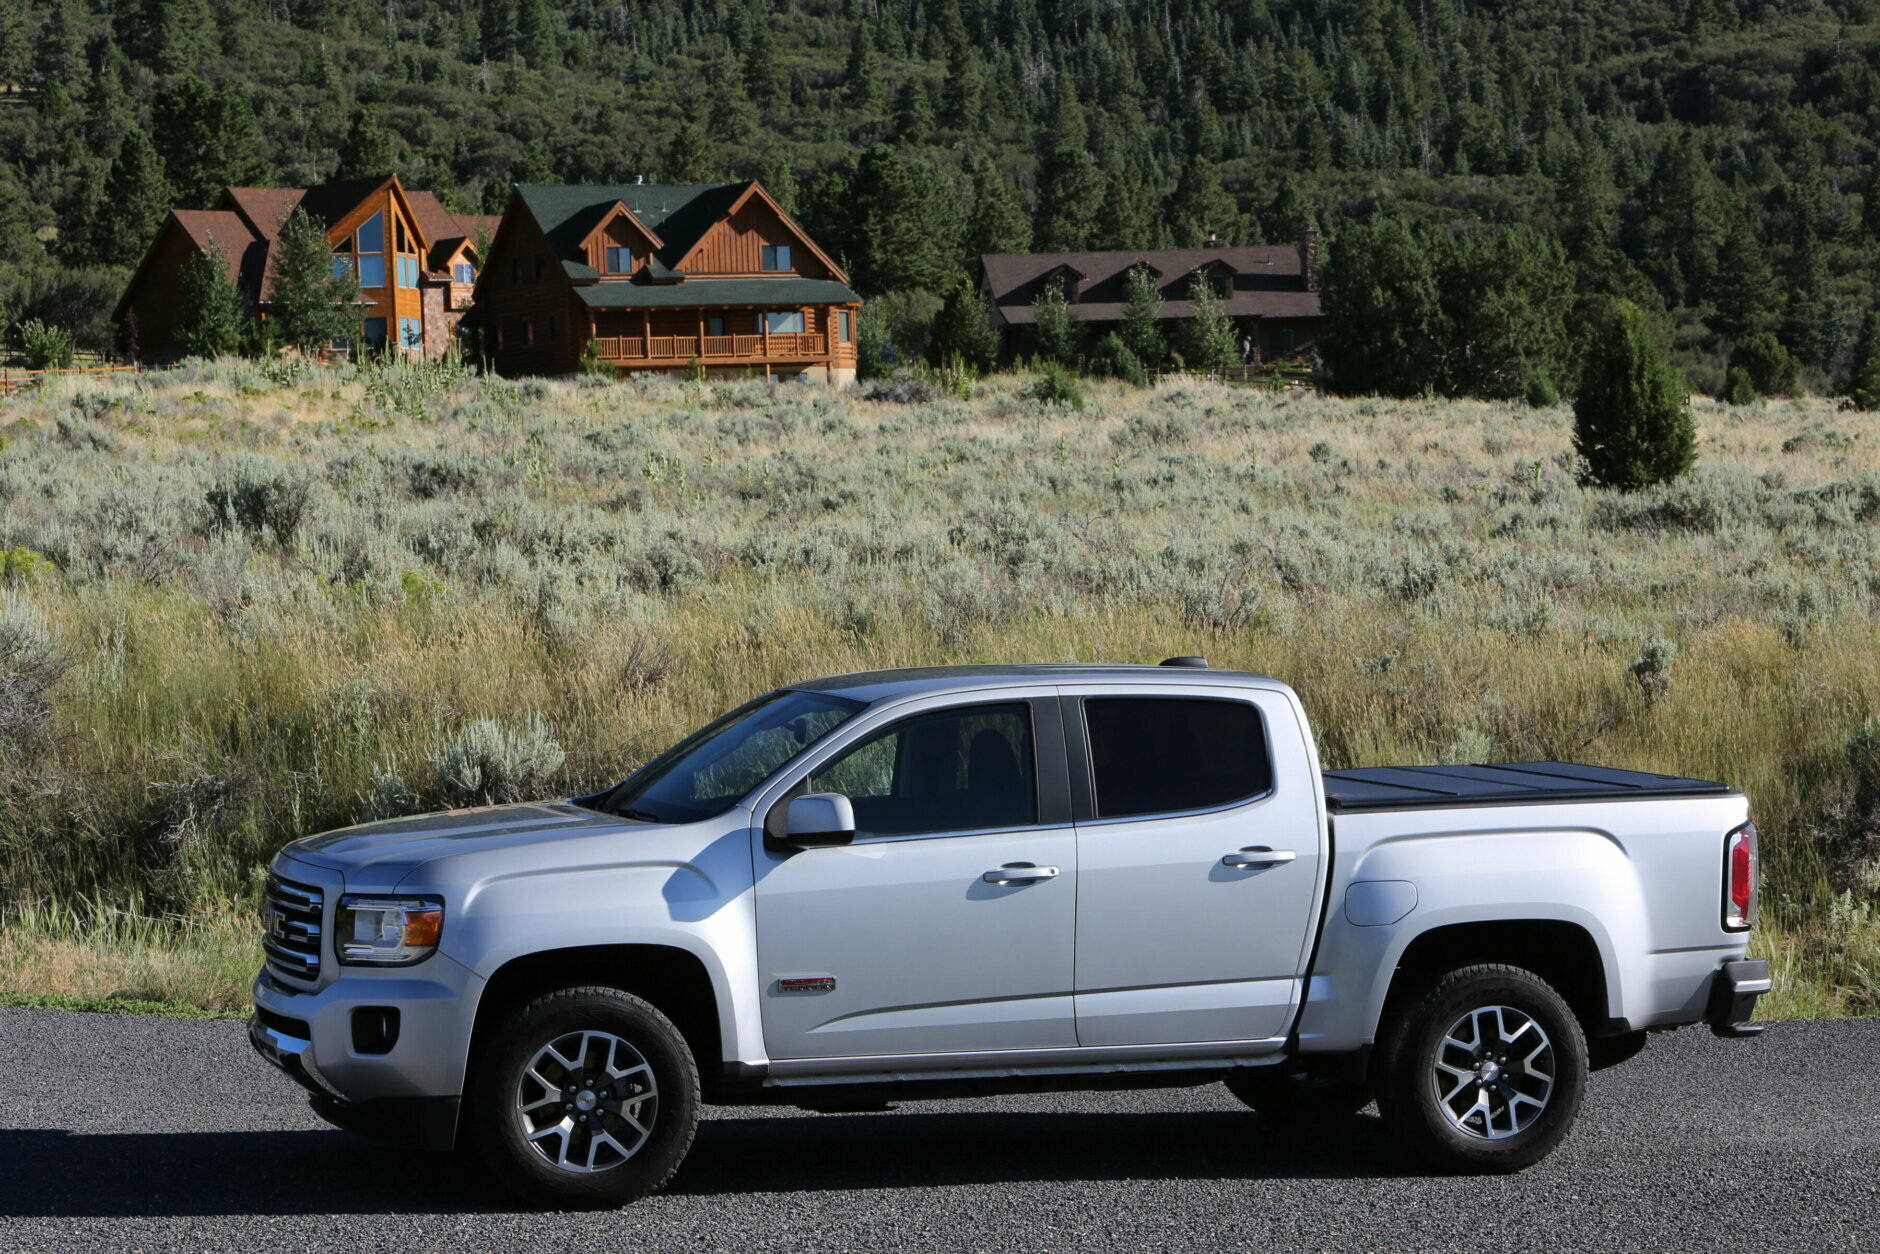 <h3><strong>2020 GMC Canyon</strong></h3>
<p><strong>Purchase Deal: </strong>0% financing for 84 months</p>
